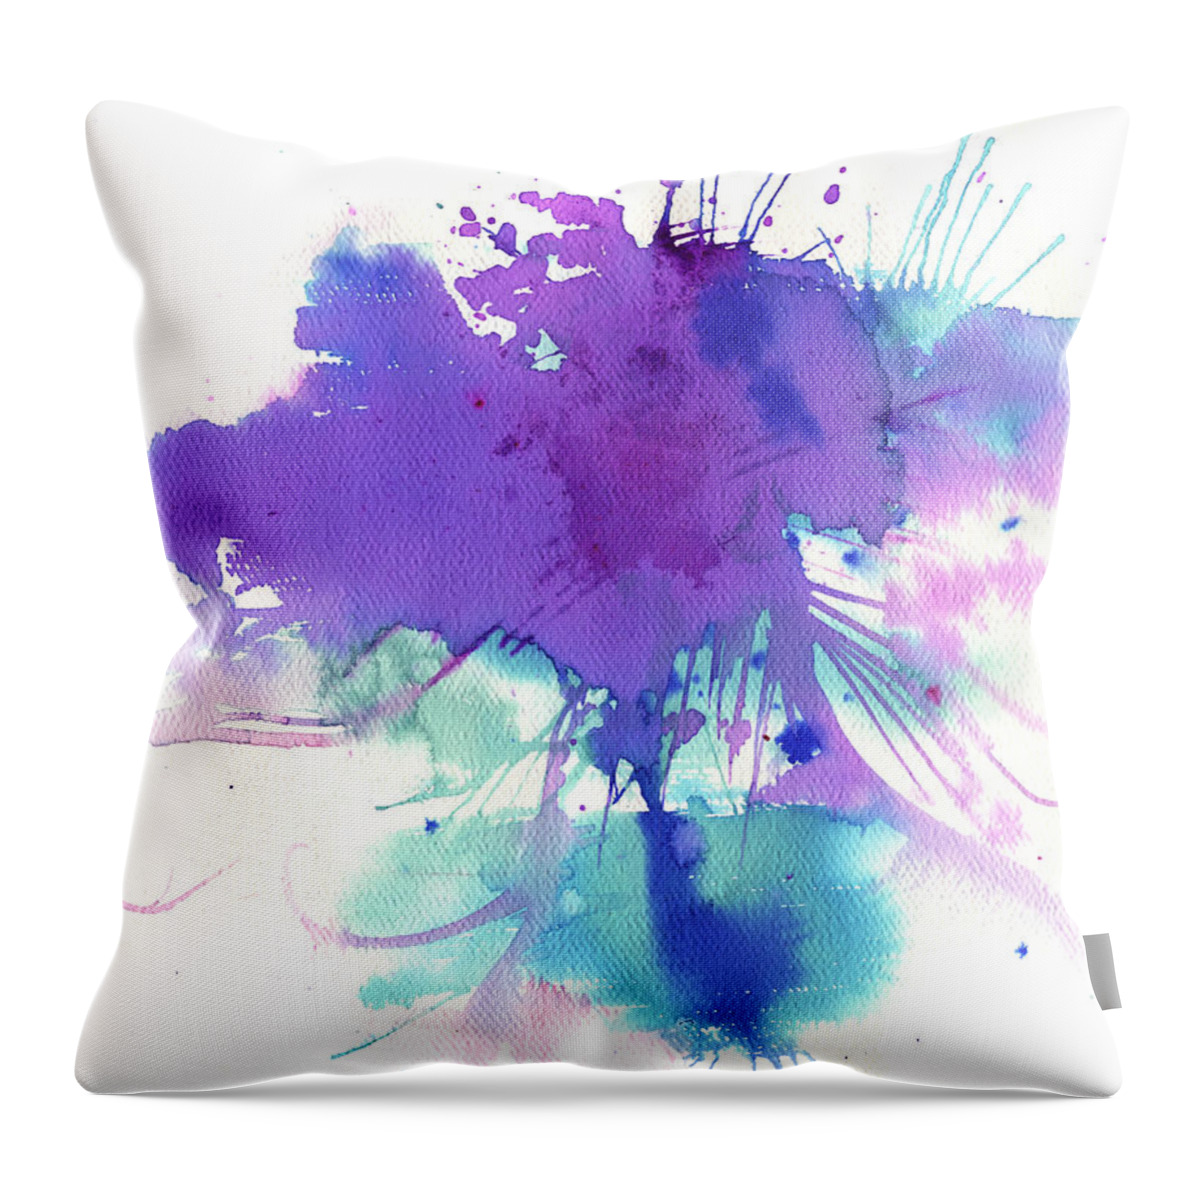 Watercolor Painting Throw Pillow featuring the digital art Cloudburst by Stereohype